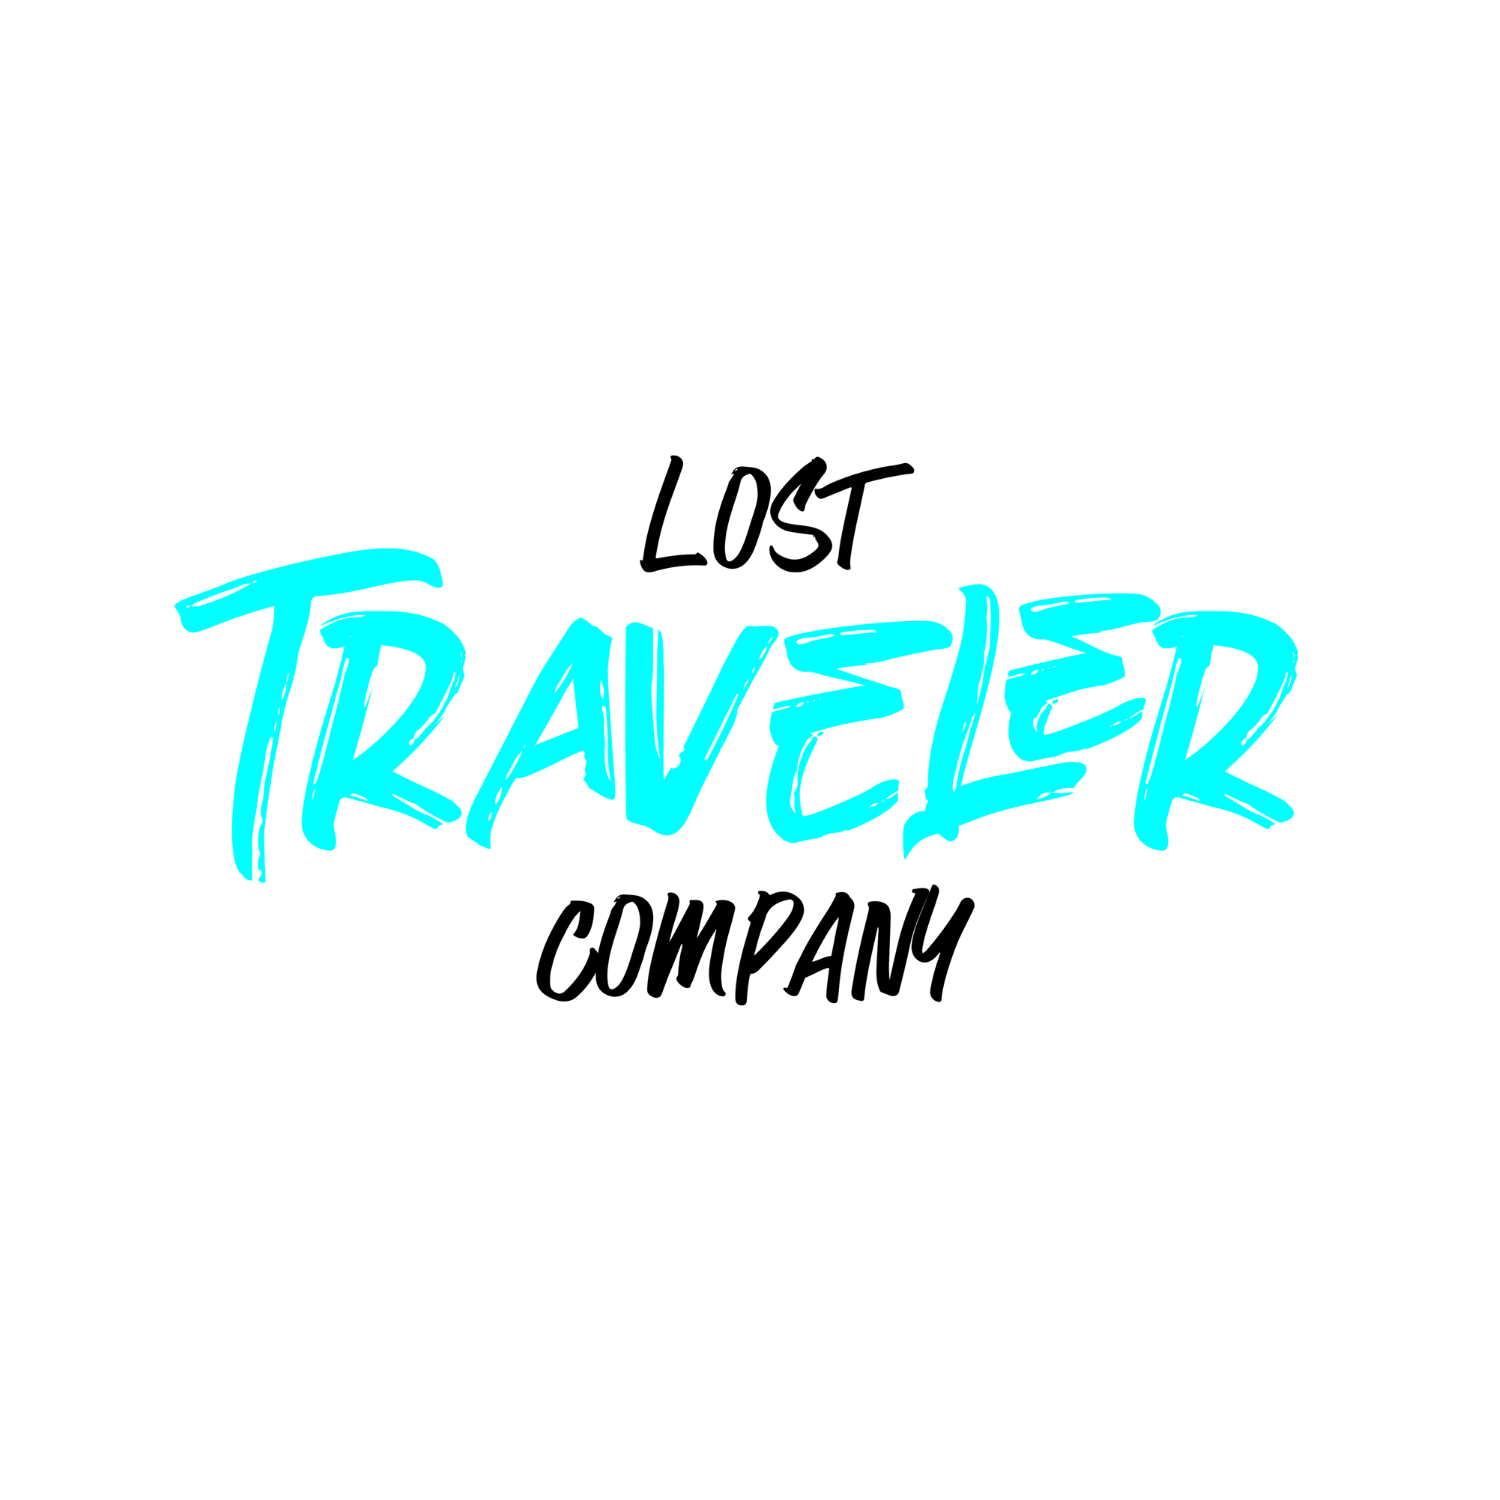 https://southernexposure.nvausa.com/wp-content/uploads/2022/02/Lost-Traveler.png